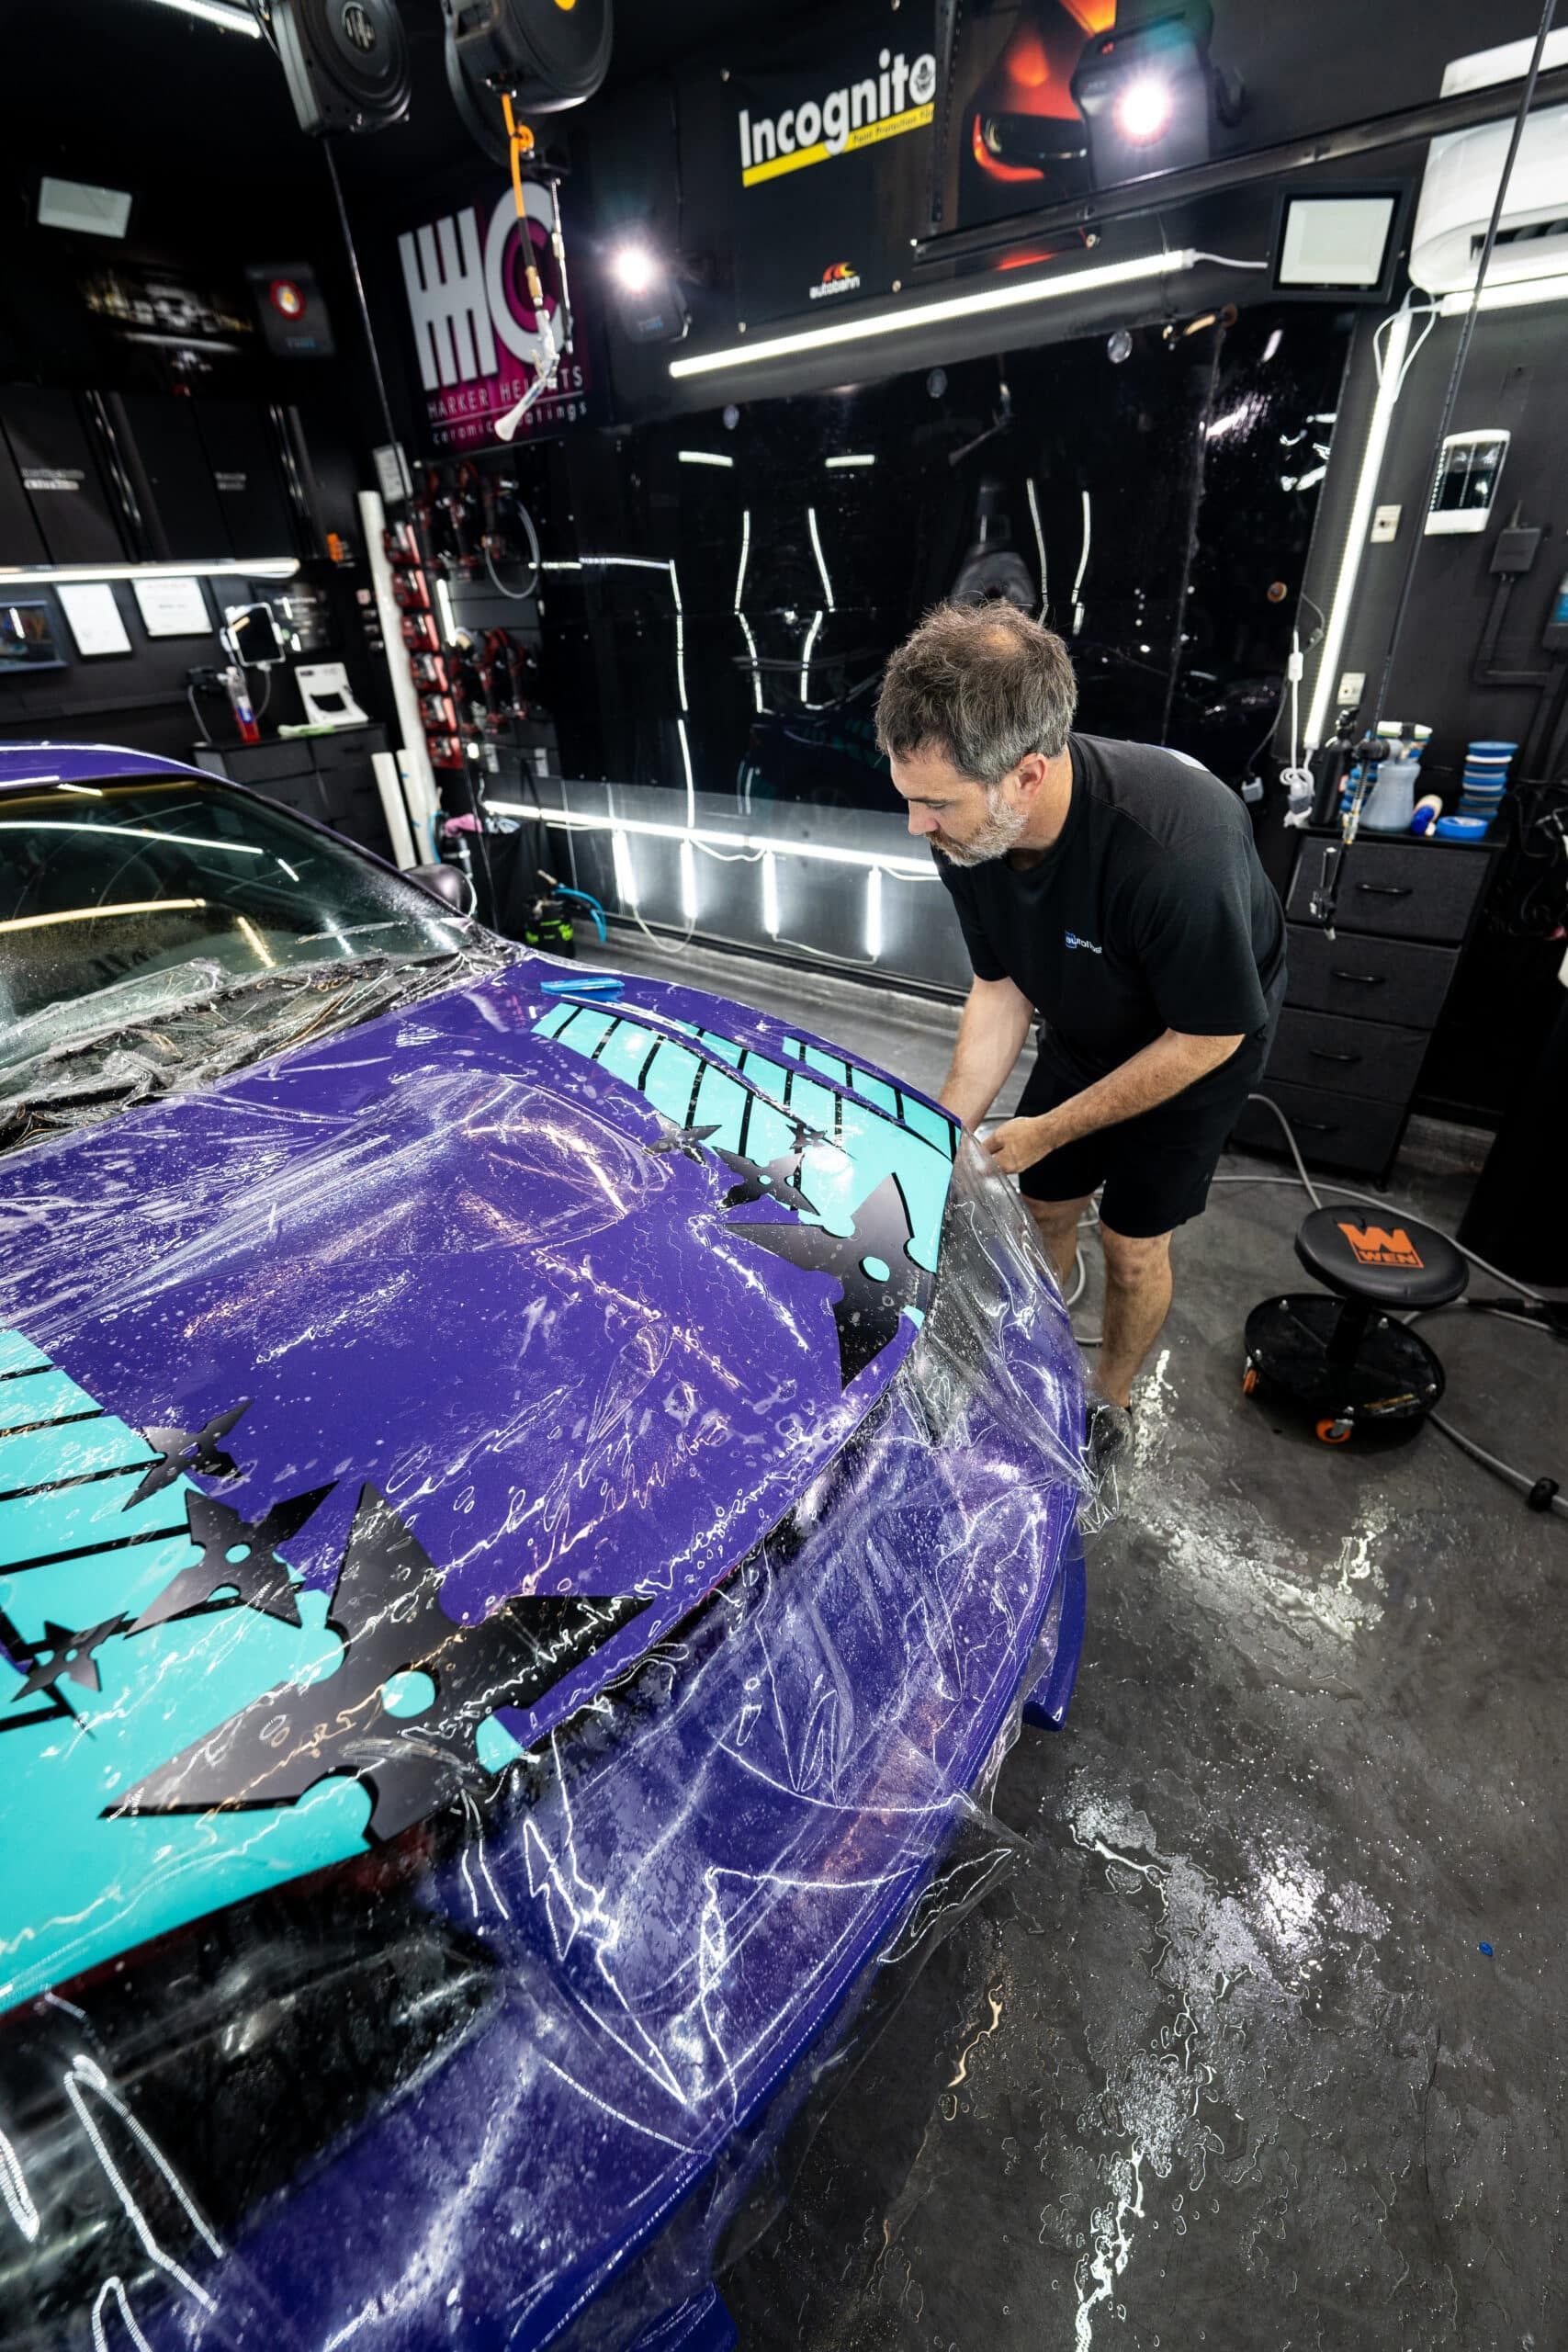 A man is covering a purple car with plastic wrap in a garage.